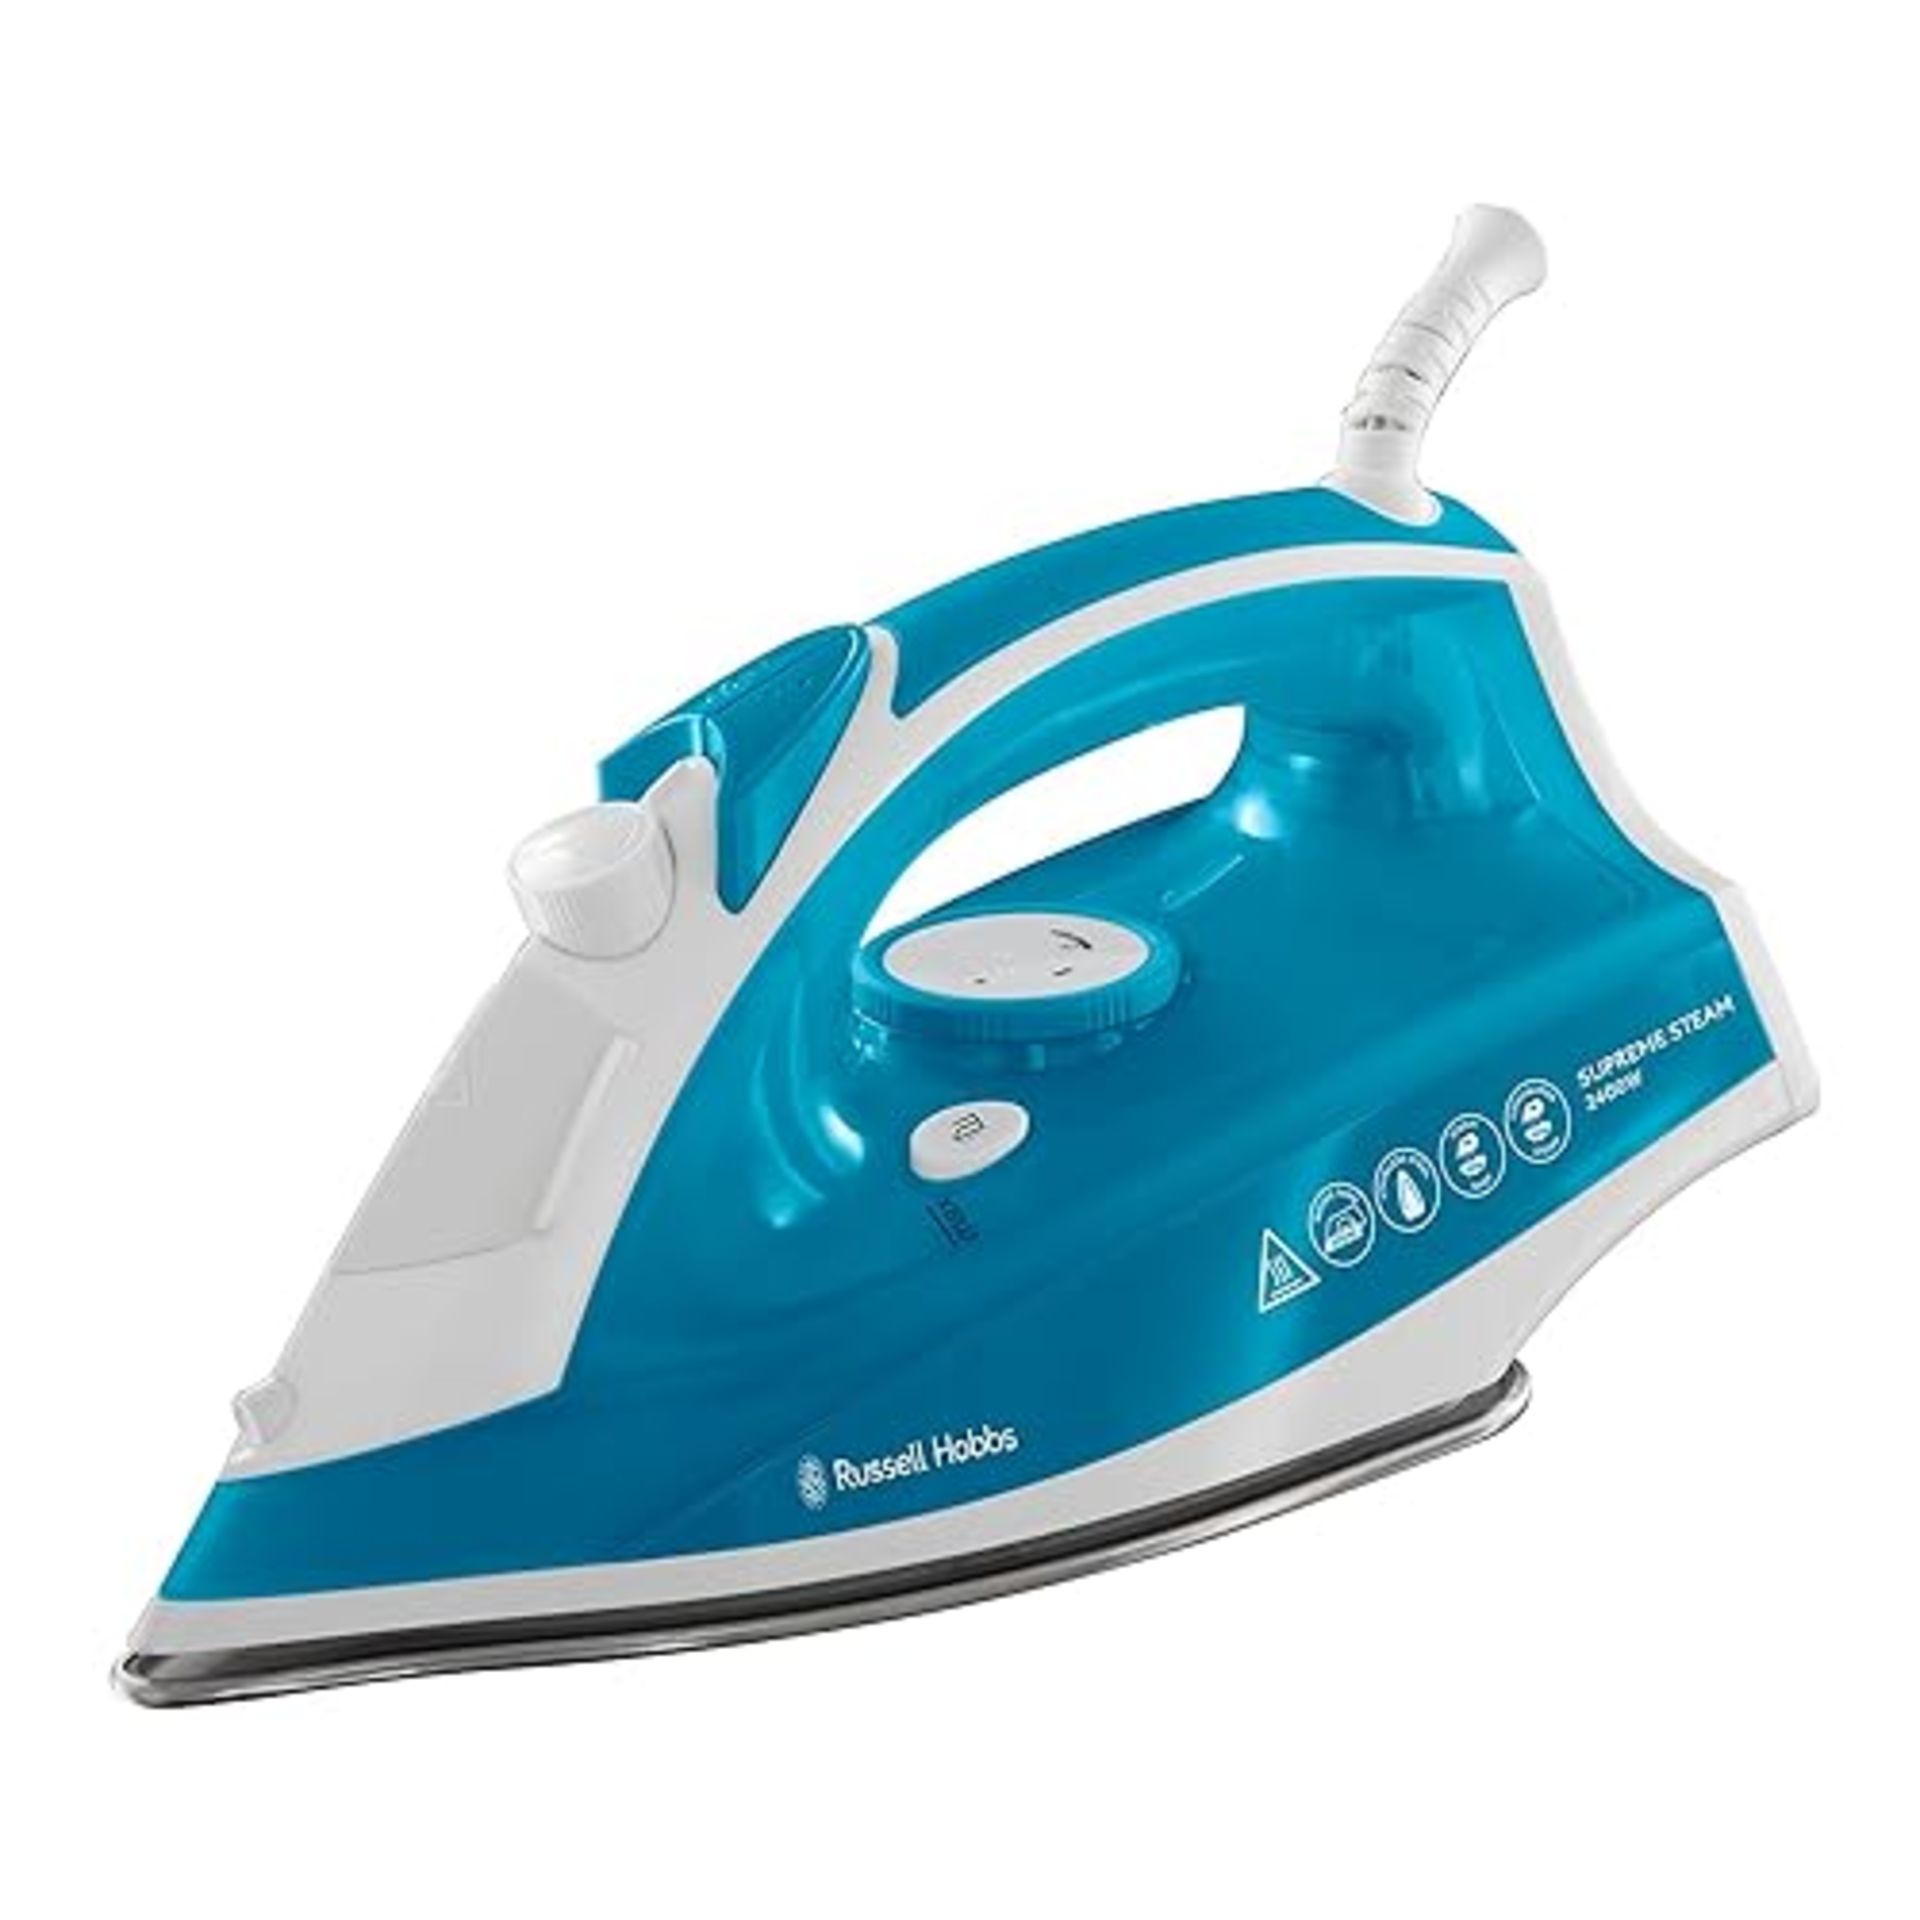 Russell Hobbs Supreme Steam Iron, Powerful vertical steam function, Non-stick stainless steel solep